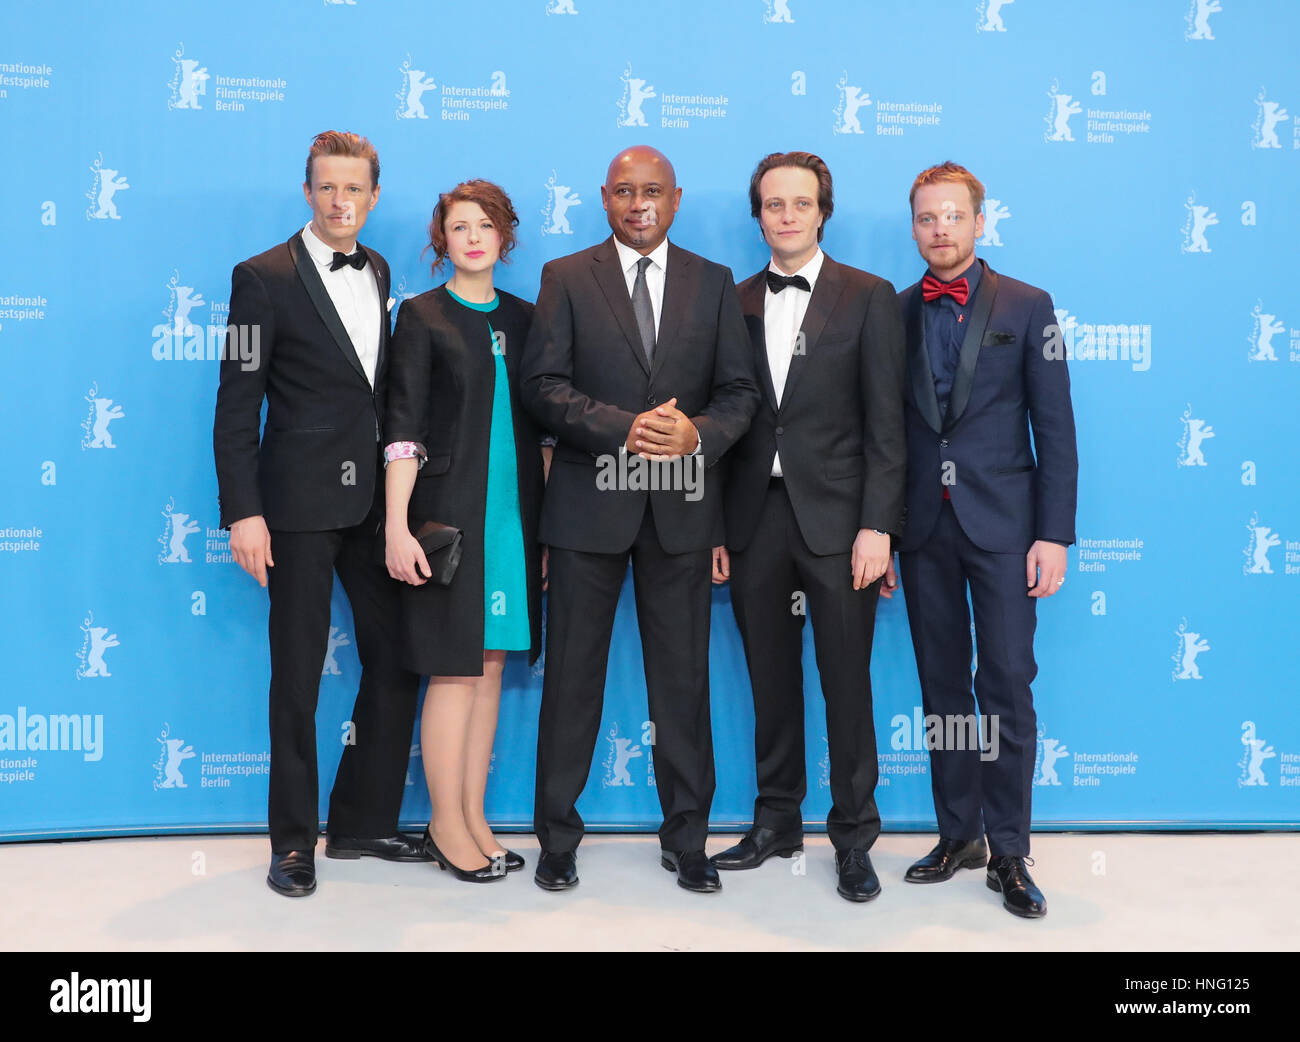 Berlin, Germany. 12th Feb, 2016. Cast members pose during a photocall of the film Le jeune Karl Marx (The Young Karl Marx) during the 67th Berlinale International Film Festival in Berlin, capital of Germany, on Feb. 12, 2016. The 67th Berlin International Film Festival runs from Feb. 9 to 19, during which a total of 399 films from 72 countries and regions will be screened and a series of cultural events will be held. Credit: Shan Yuqi/Xinhua/Alamy Live News Stock Photo